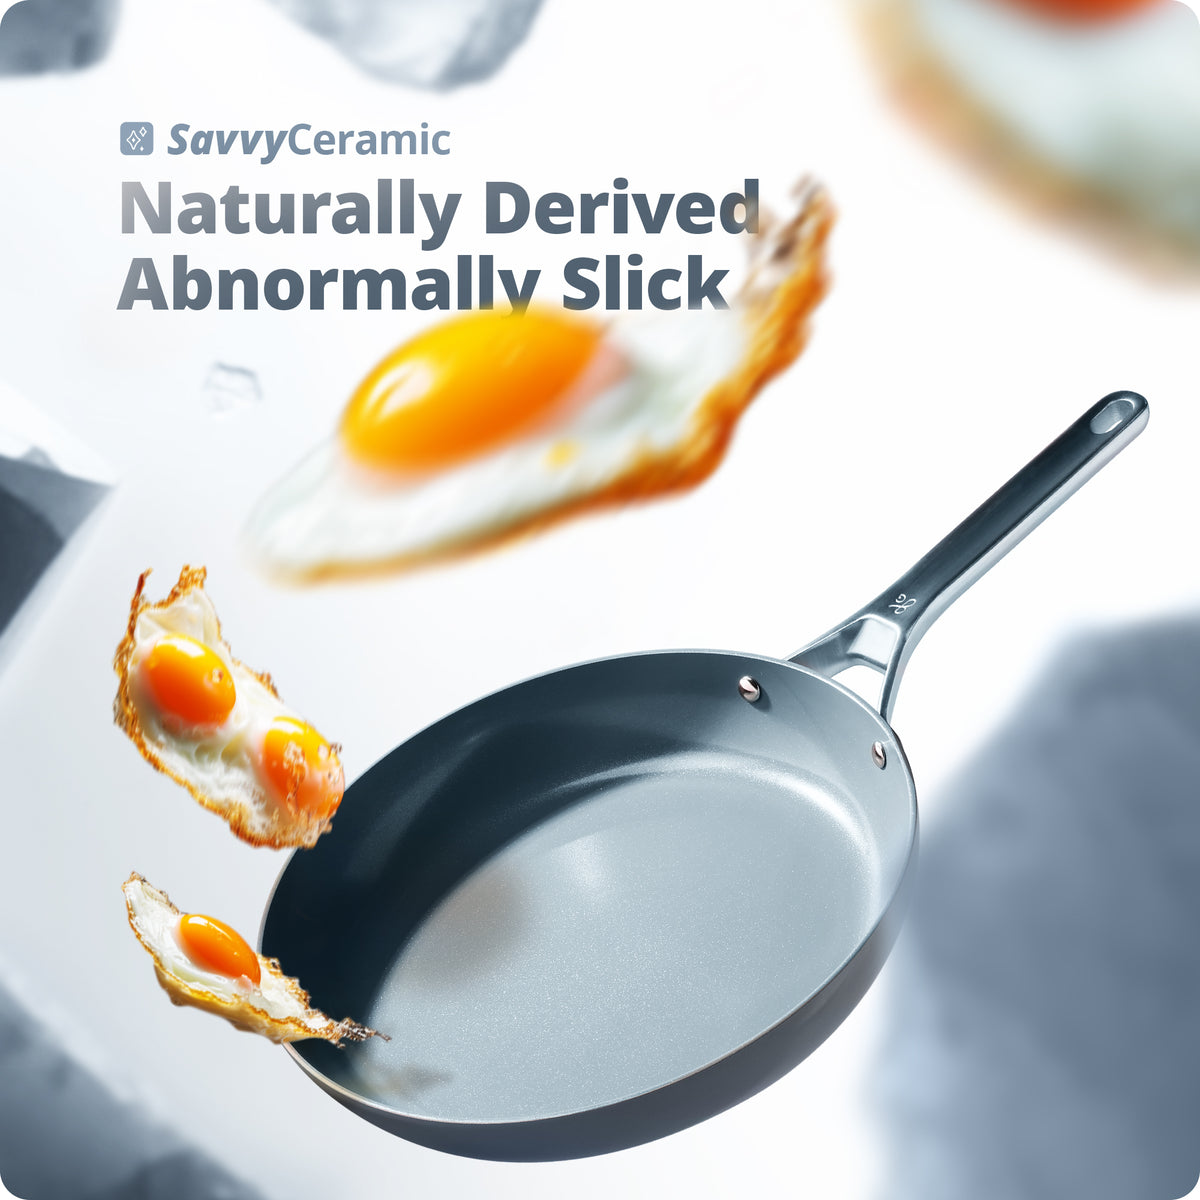 Super Natural Non-Stick: Naturally Derived Ceramic, Abnormally Slick, Easy Cleanup, Extraordinarily Built (Midnight Gray)